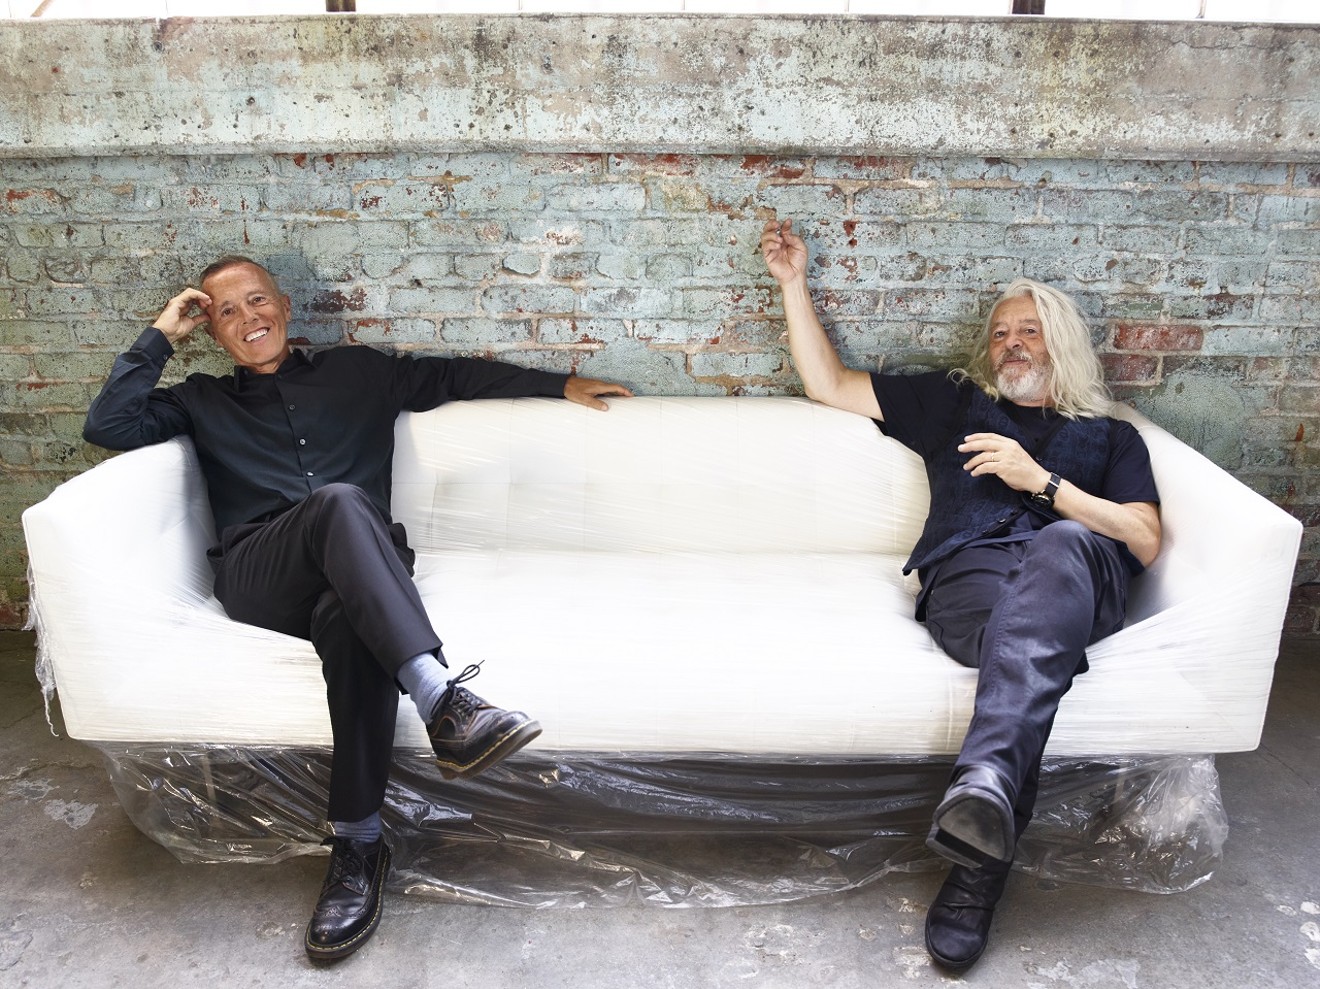 Tears For Fears (Curt Smith, left, and Roland Orzabal, right) plays Ak-Chin Pavilion on May 27th.